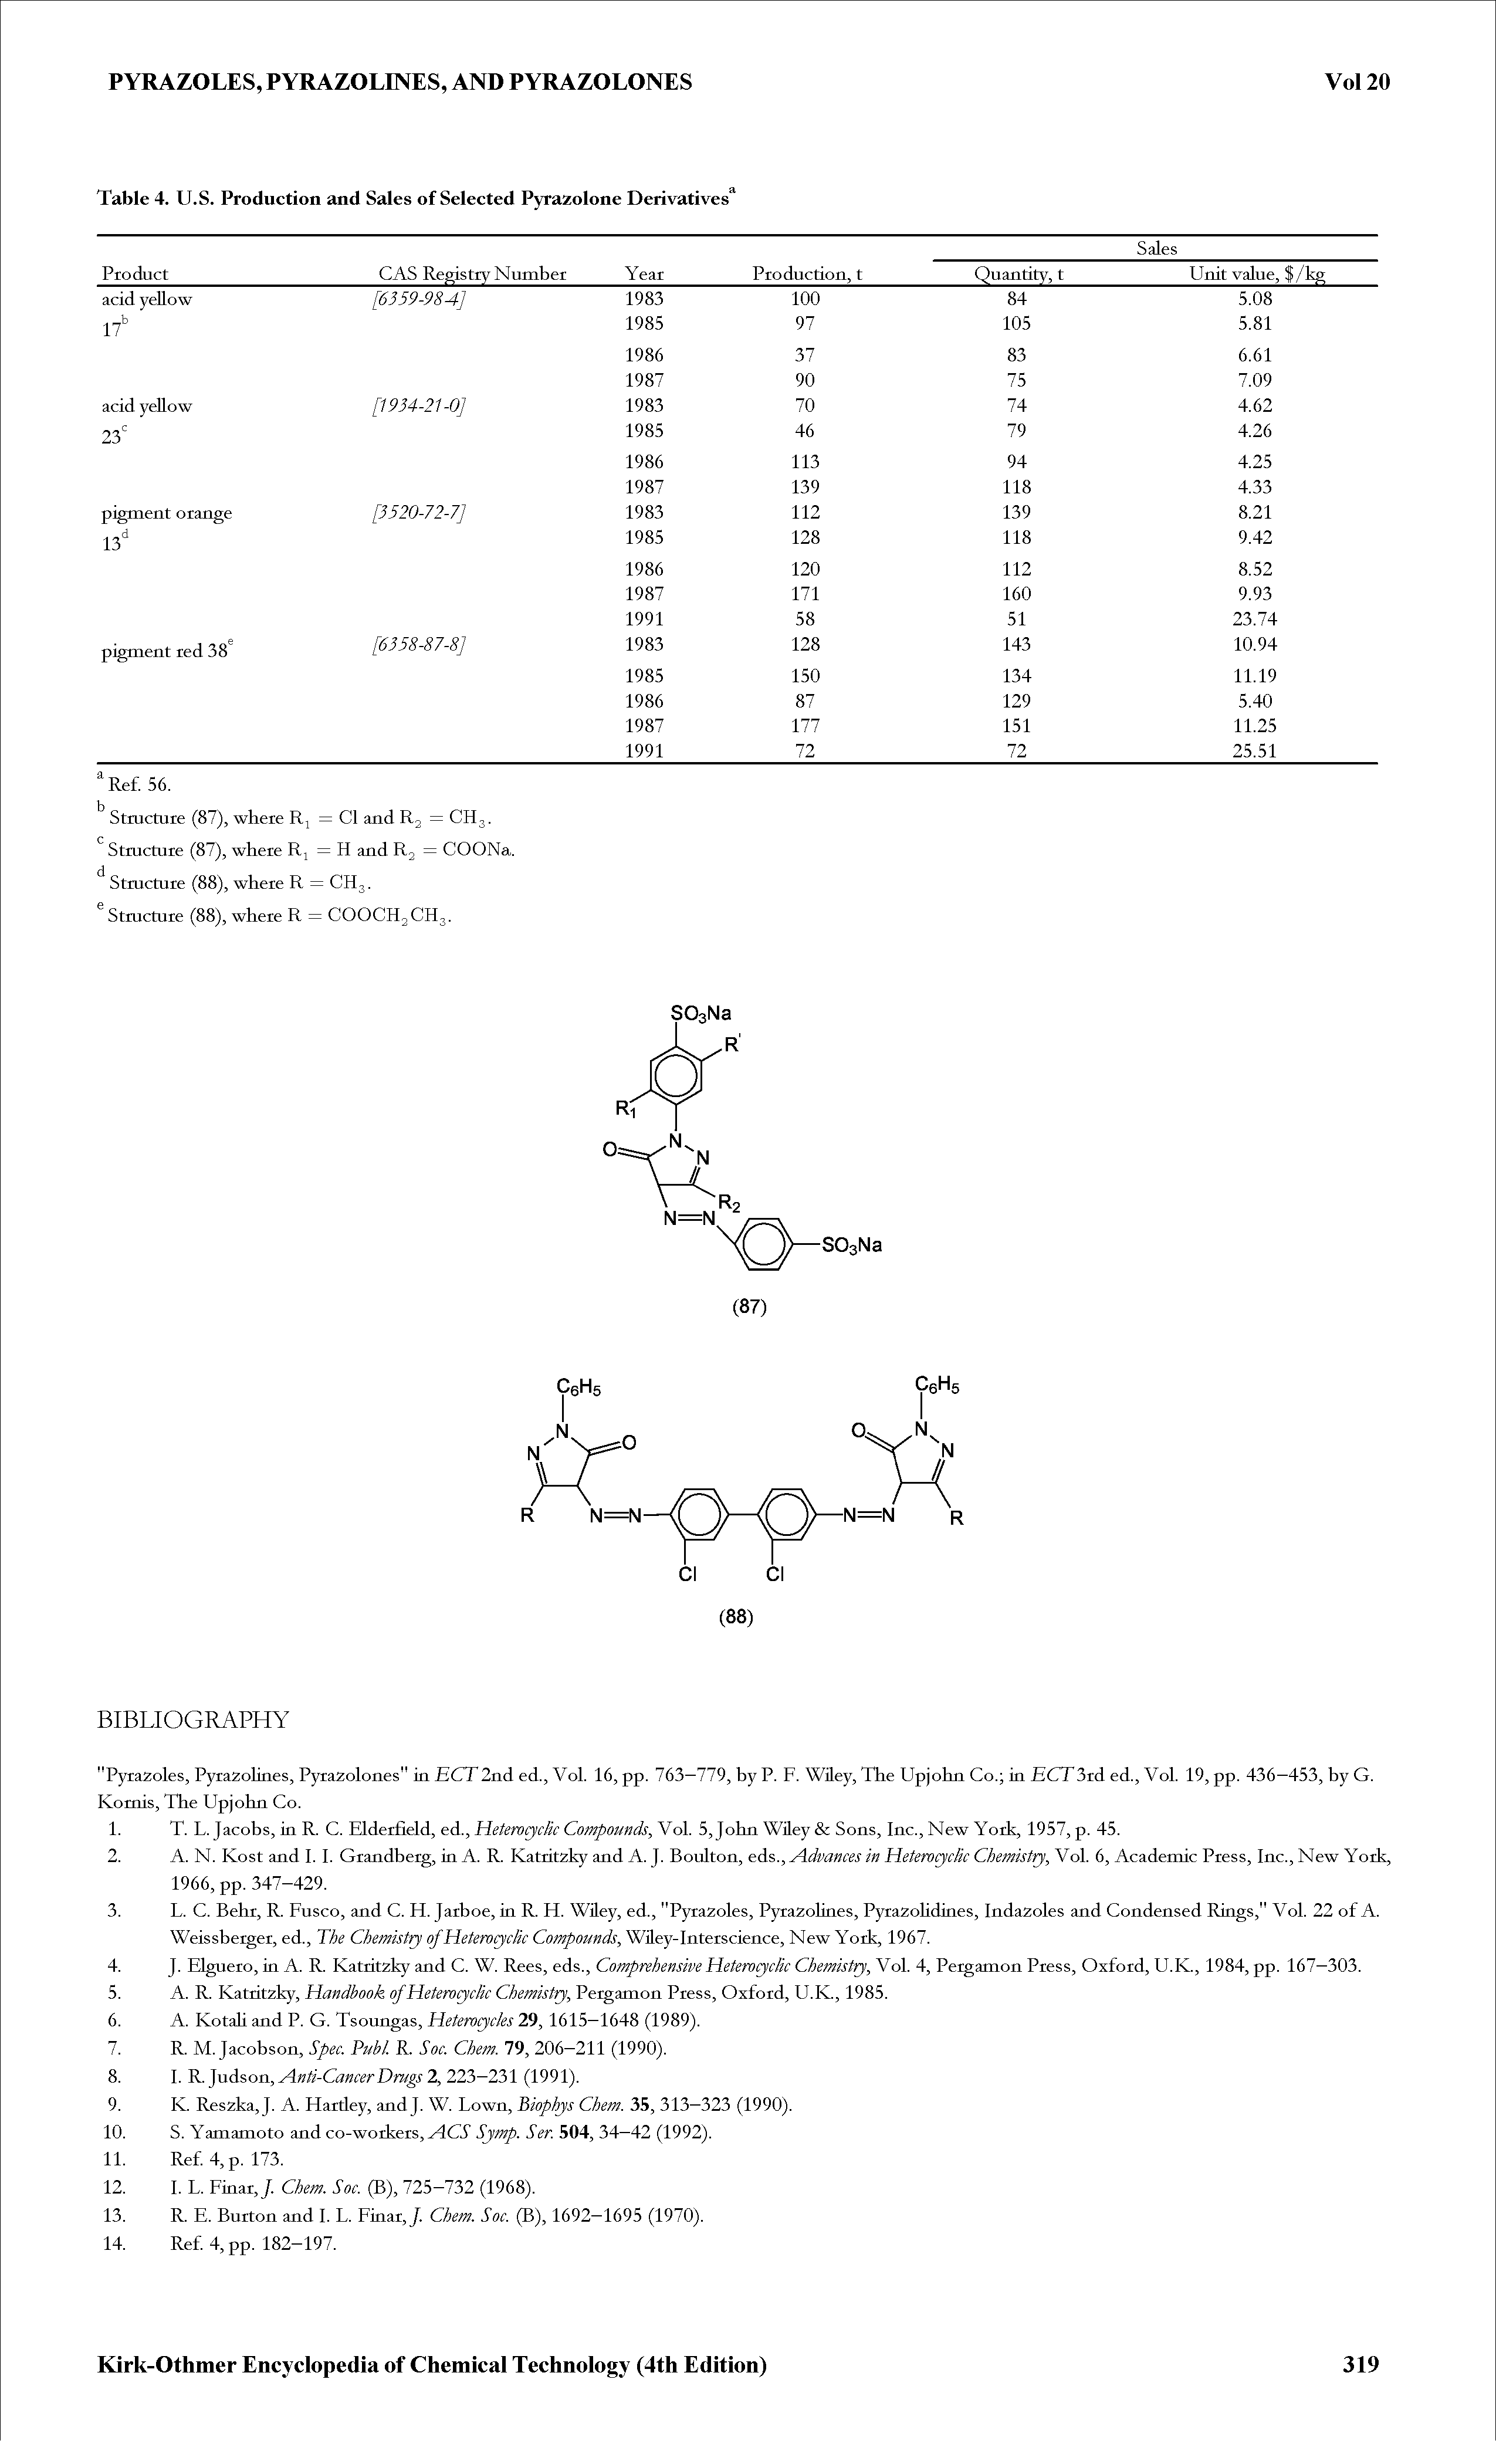 Table 4. U.S. Production and Sales of Selected Pyrazolone Derivatives ...